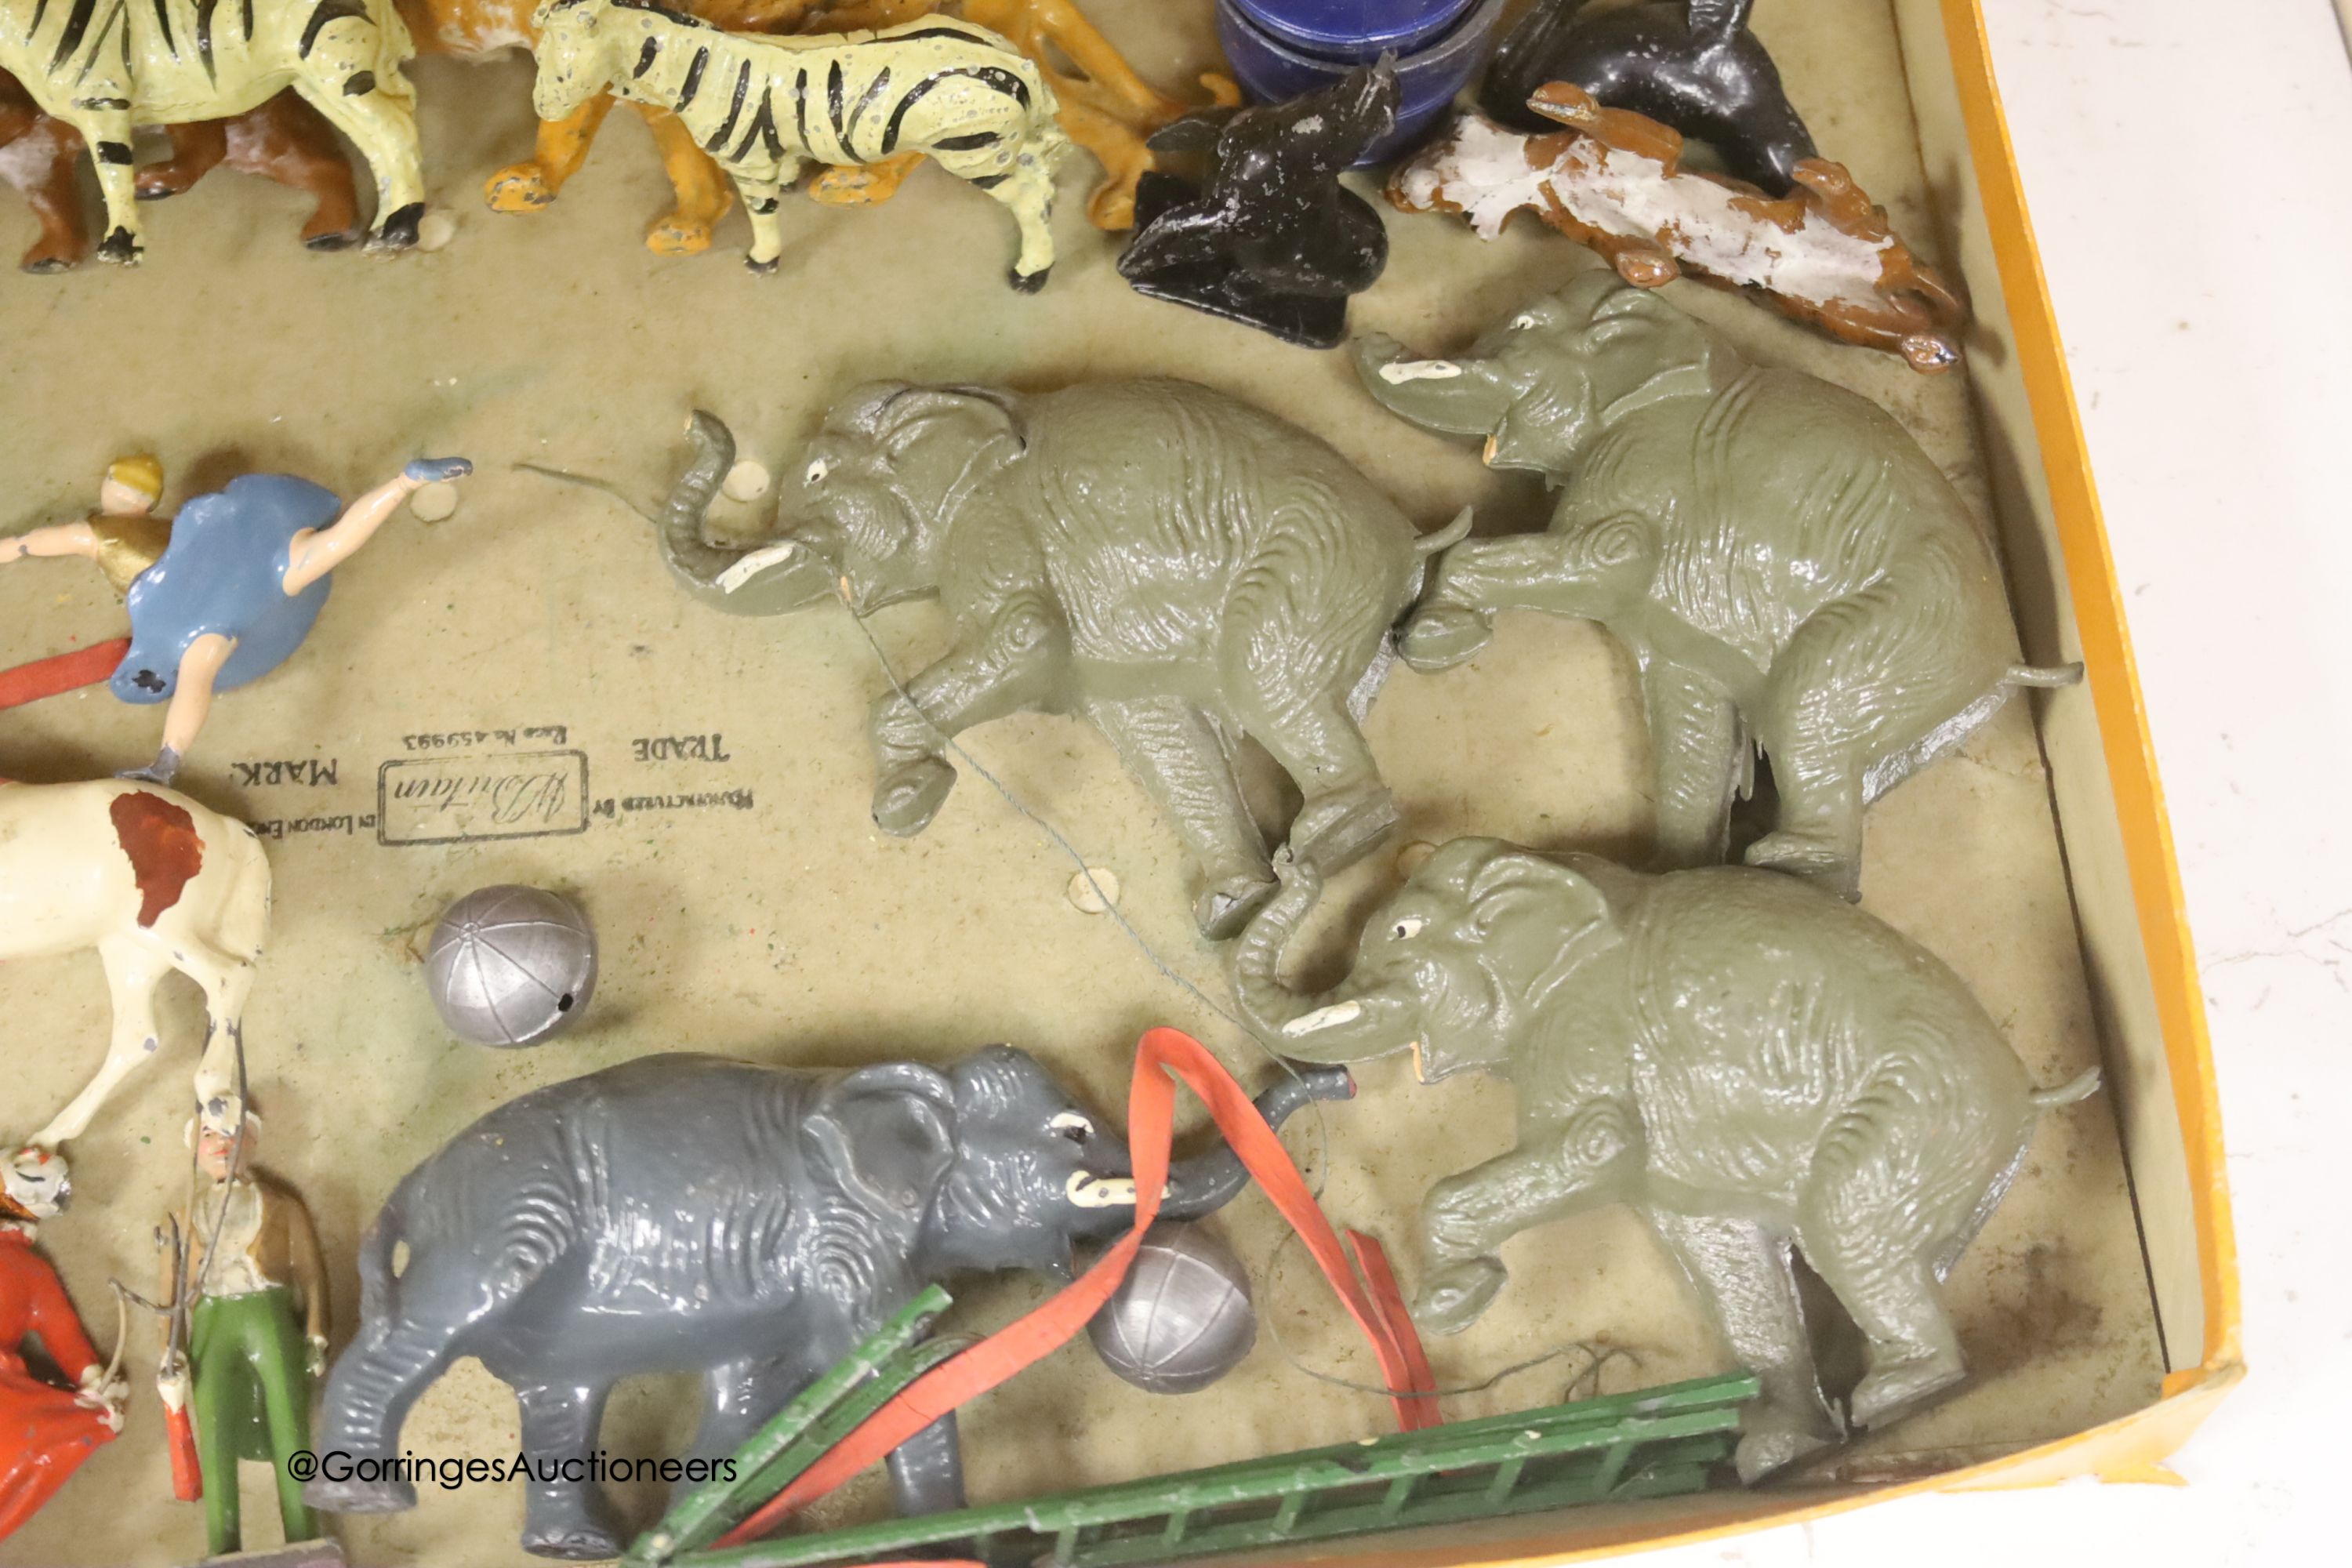 A Britain's Set 1443 Mammoth Circus, 1936-41, in original box and further related items - Image 5 of 5